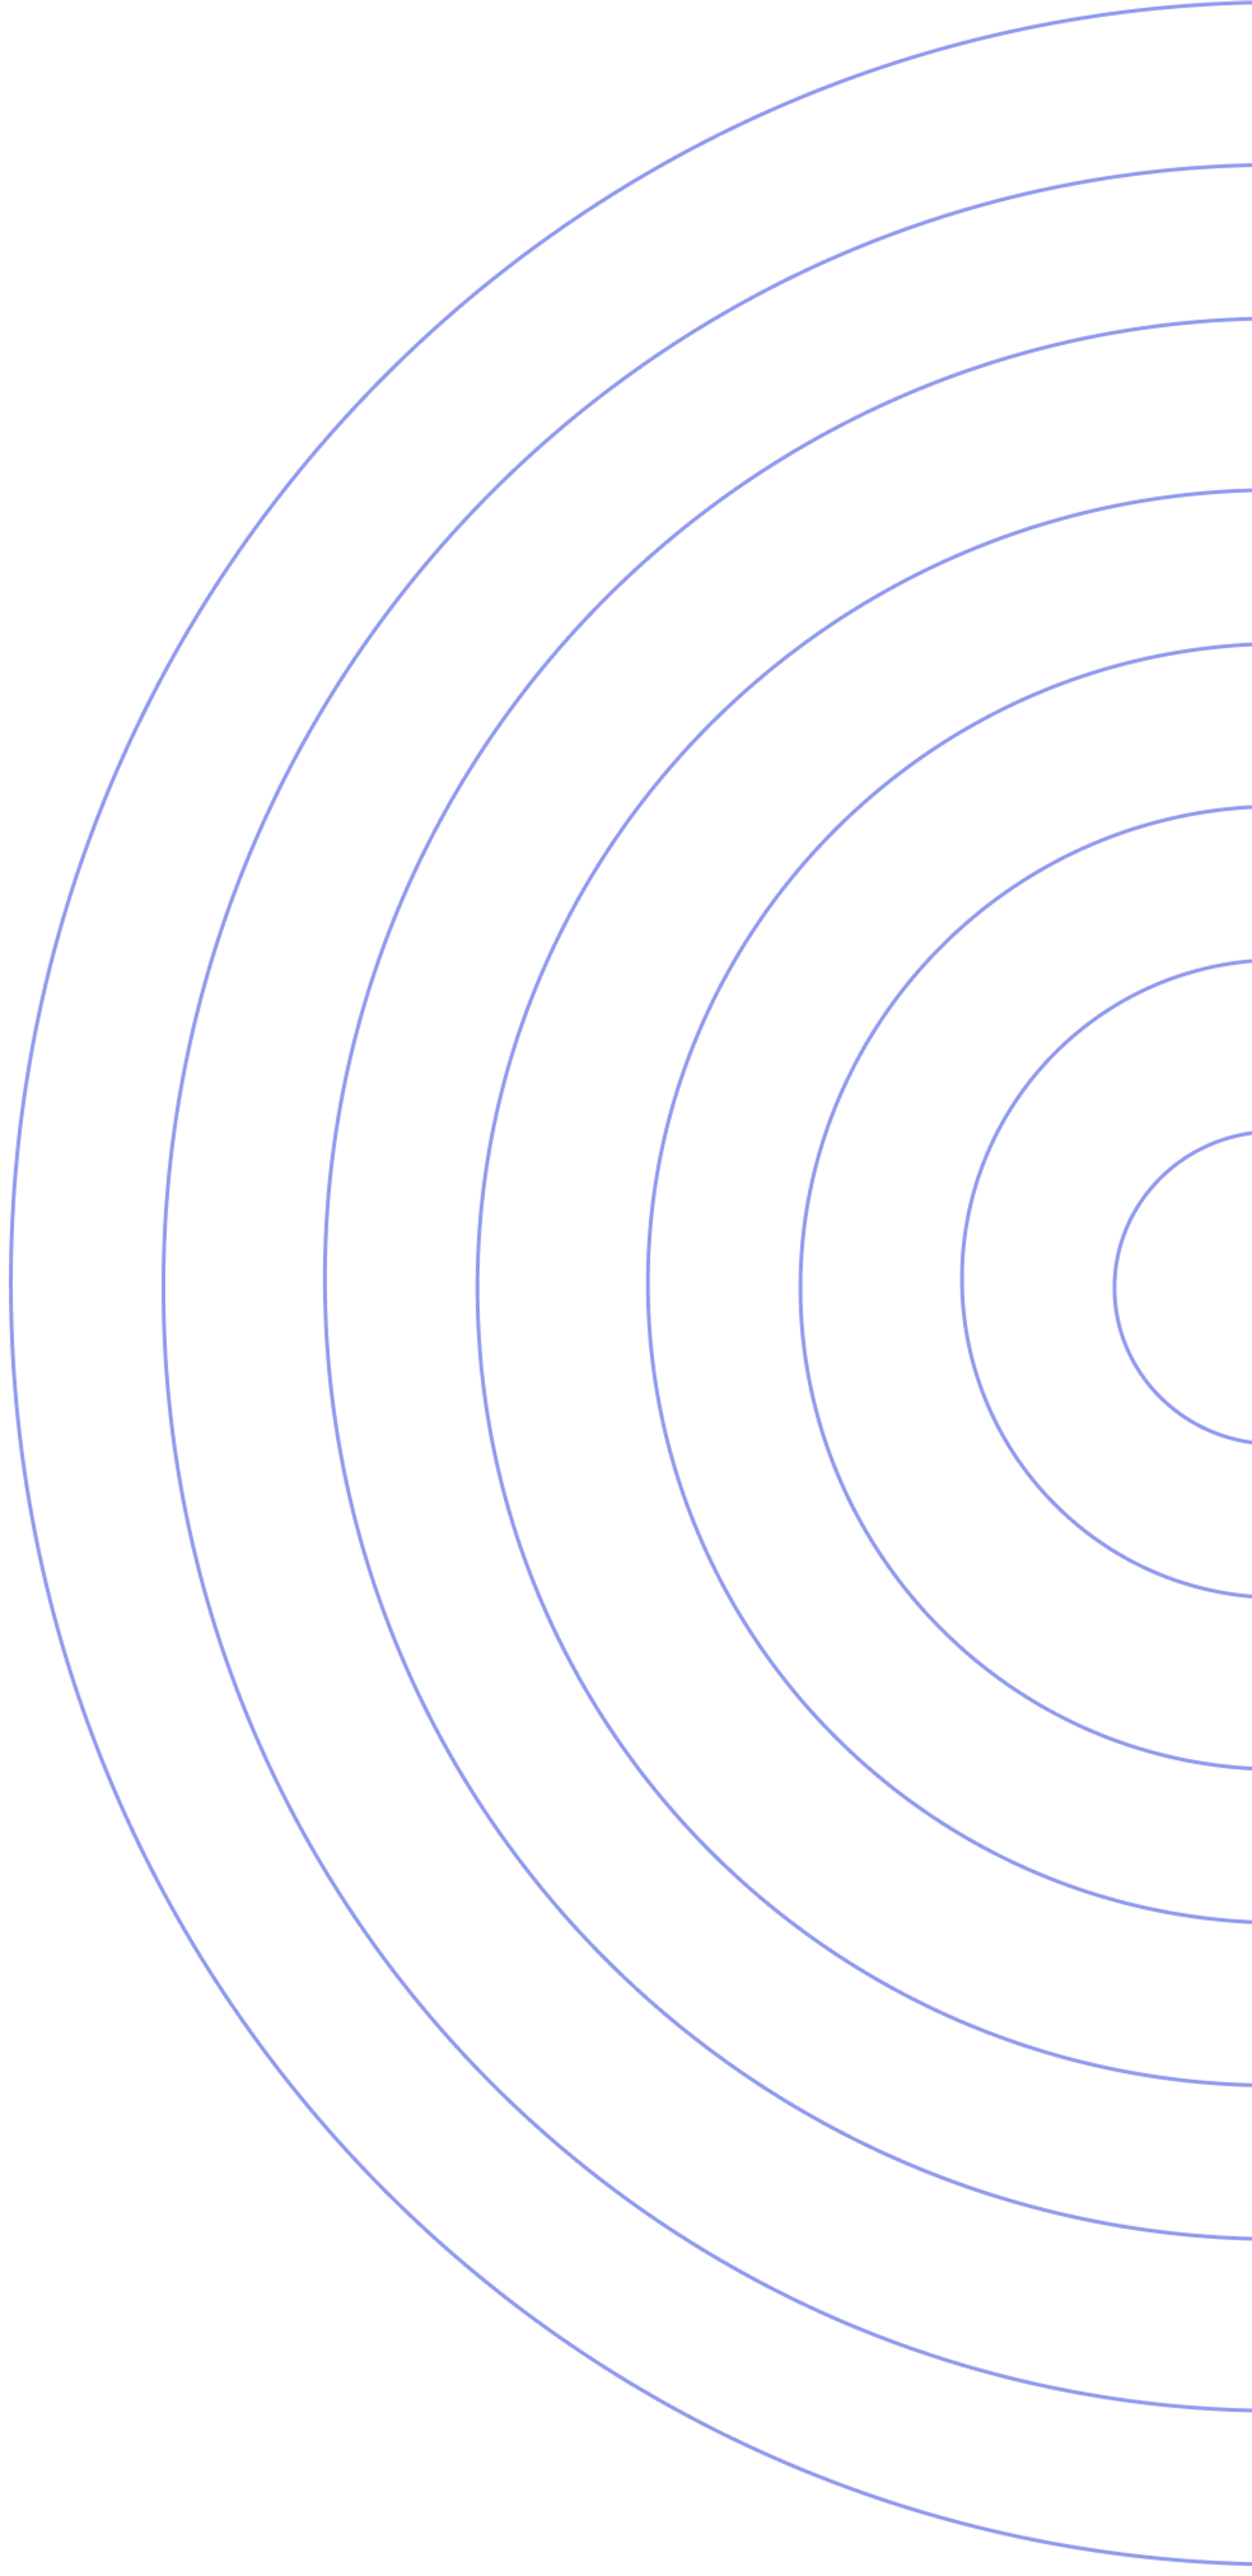 An illustration of the halves of 8 concentric circles